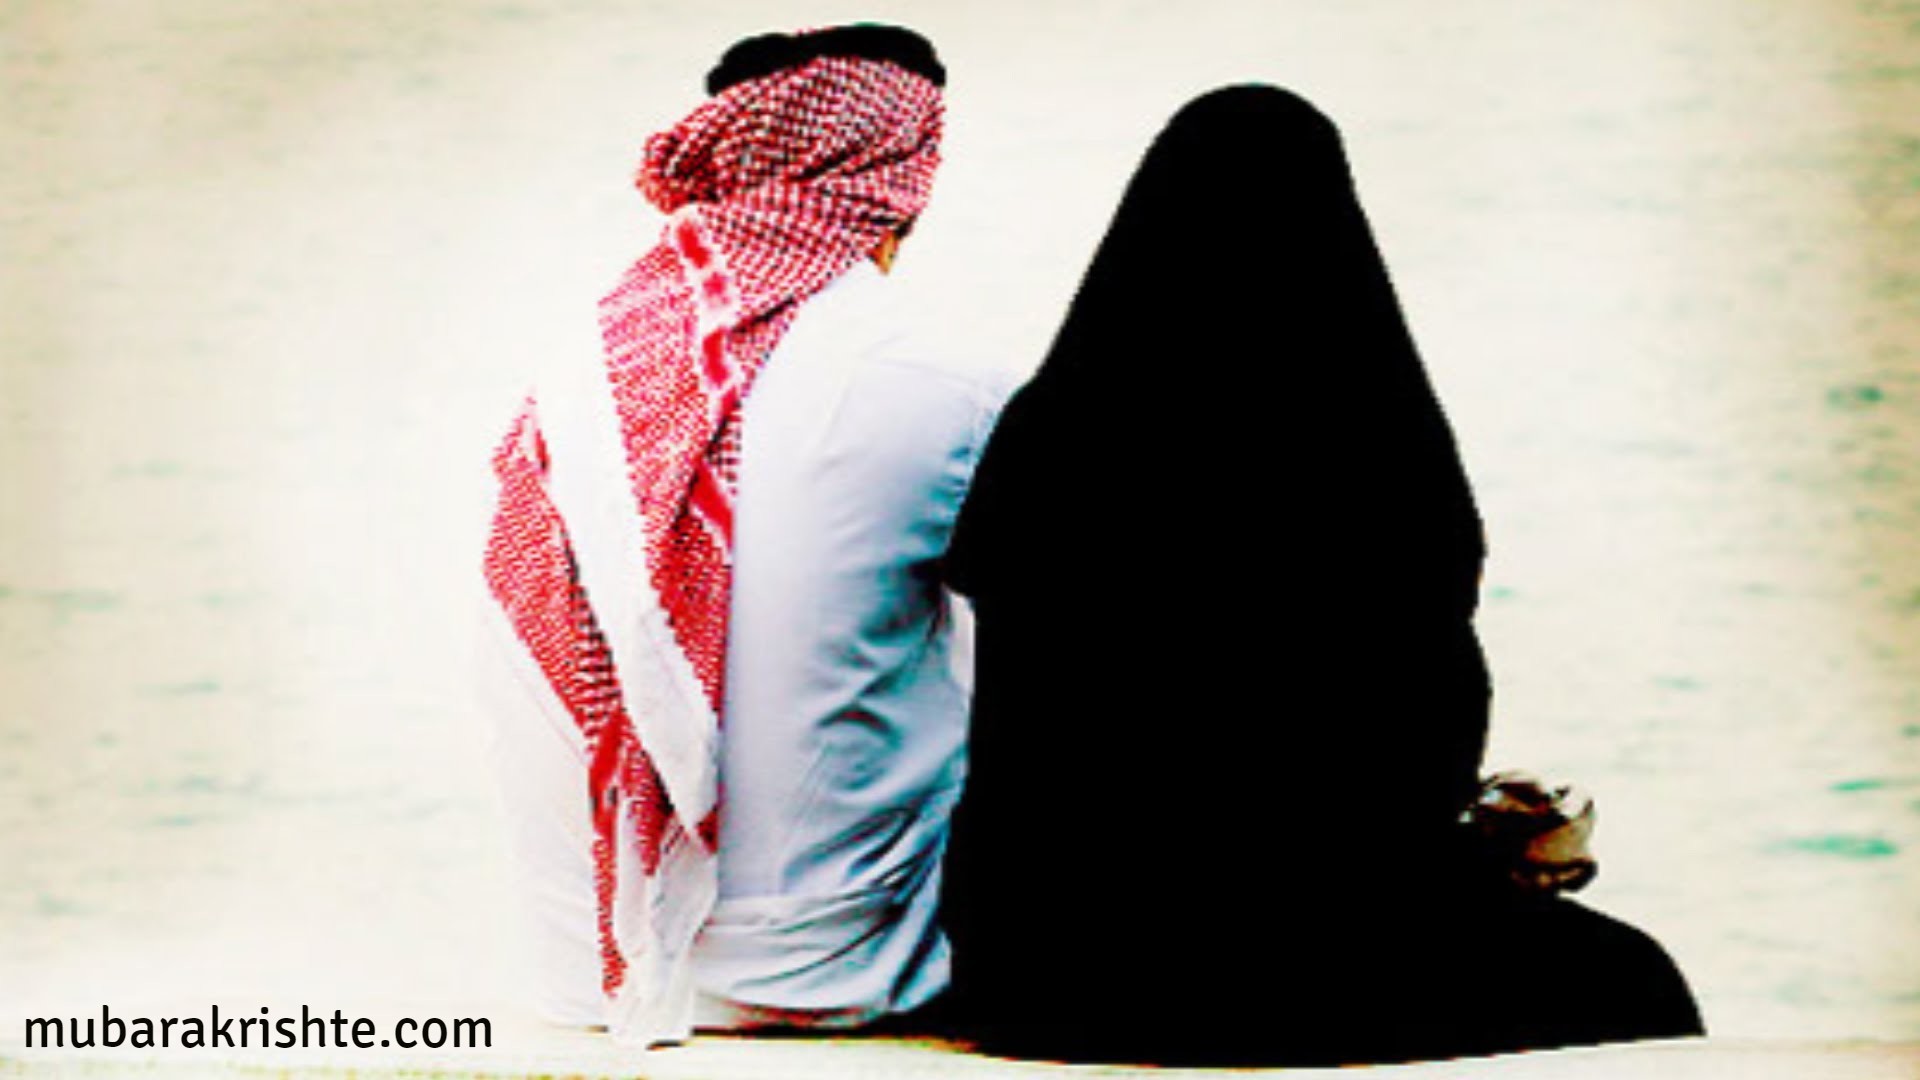 Matrimonial Sites and Muslim Marriages